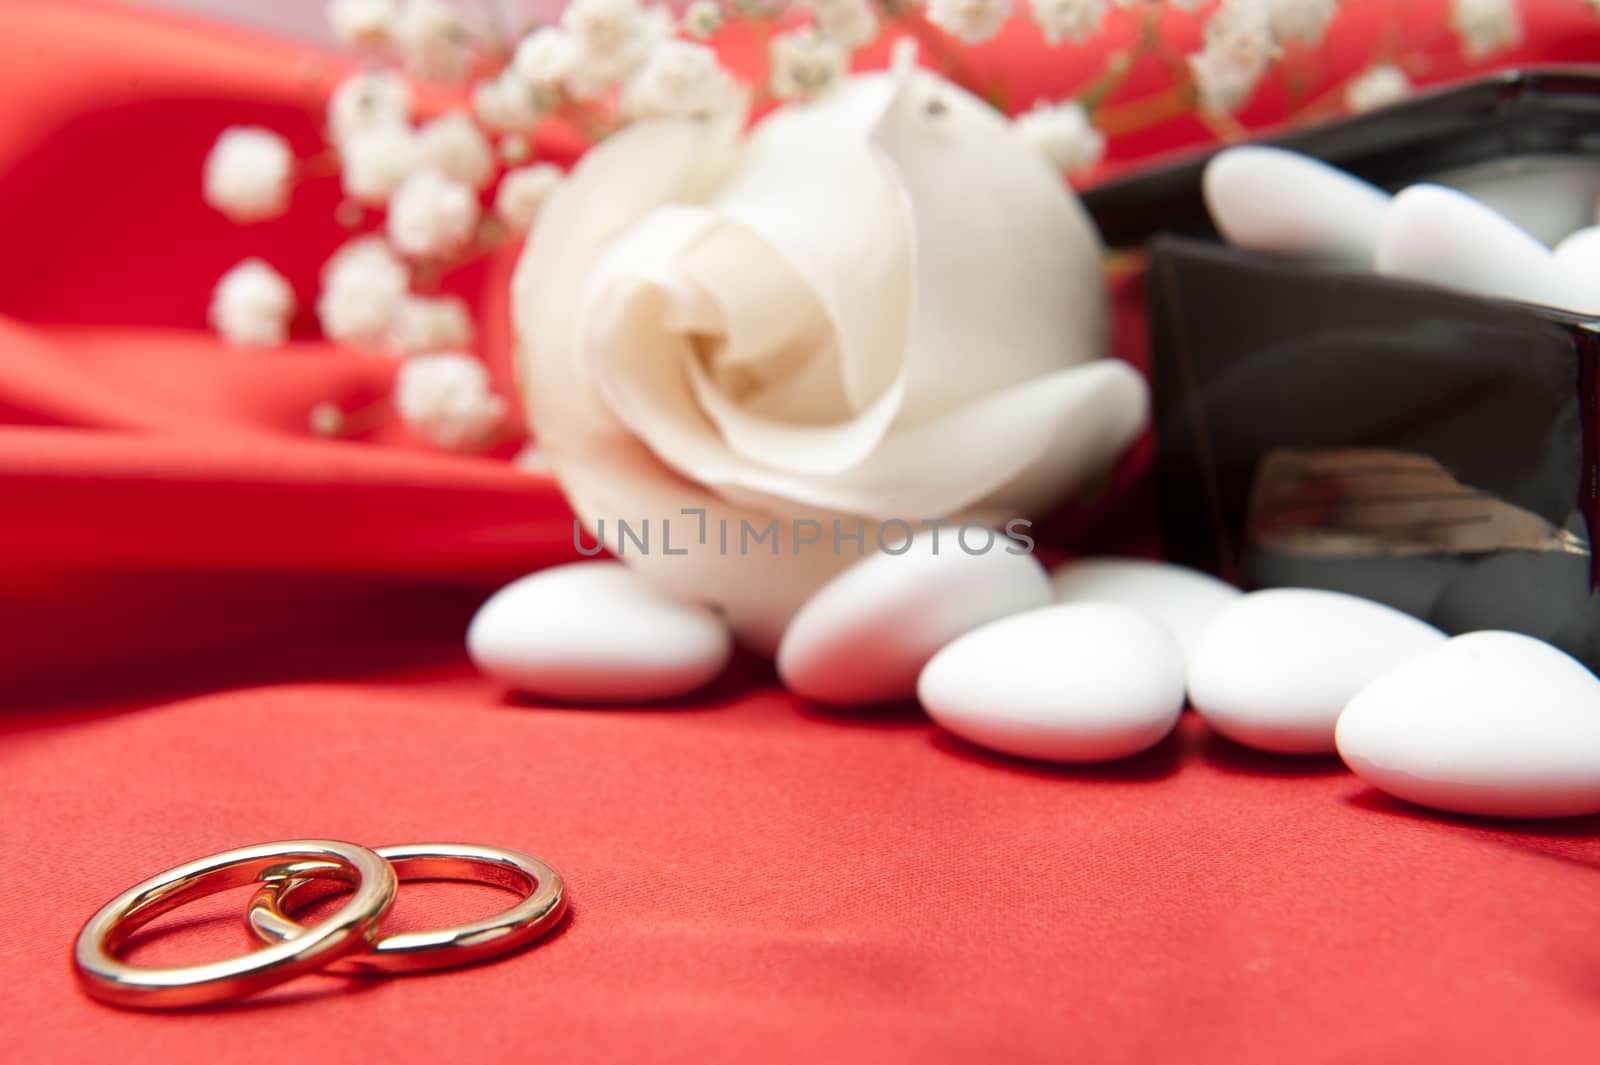  wedding rings and  favors on elegant  fabric  by carla720